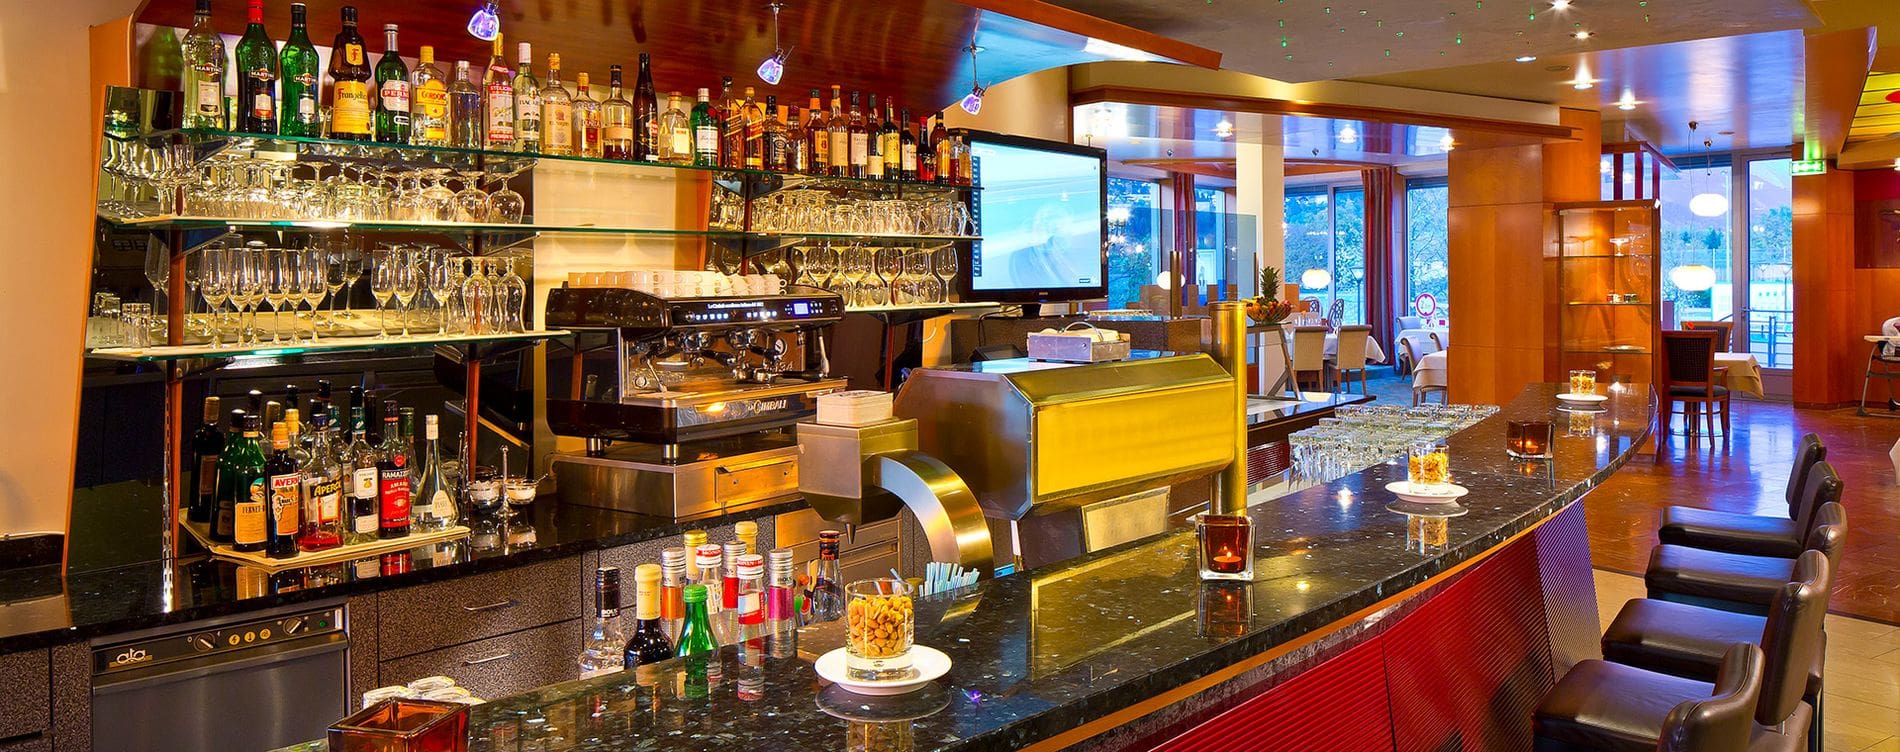 The bar and lounge at Penz Hotel West, one of the best hotels in Innsbruck for families.